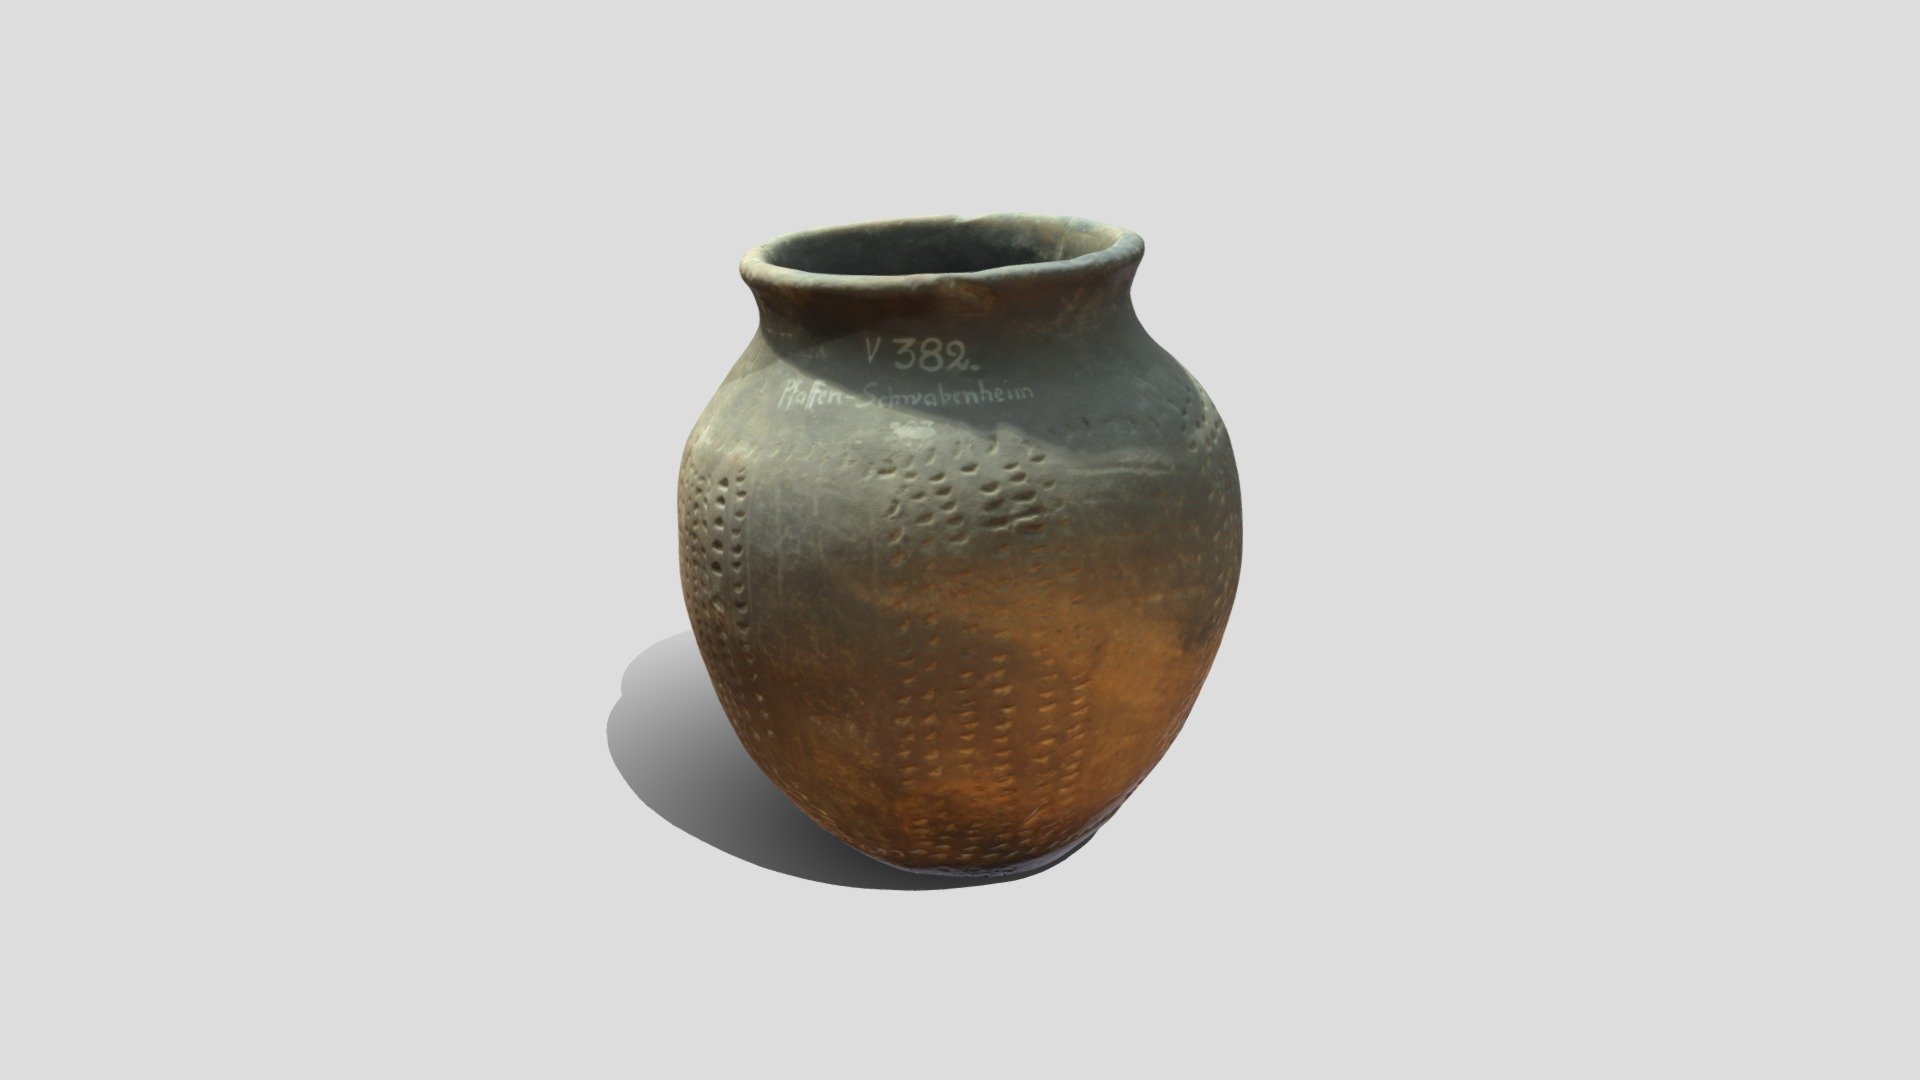 This is a 3D model of a jar decorated with an incised pattern.

The original object was found in southwestern Germany.

Dating: Late Iron Age or Latène Period 3d model